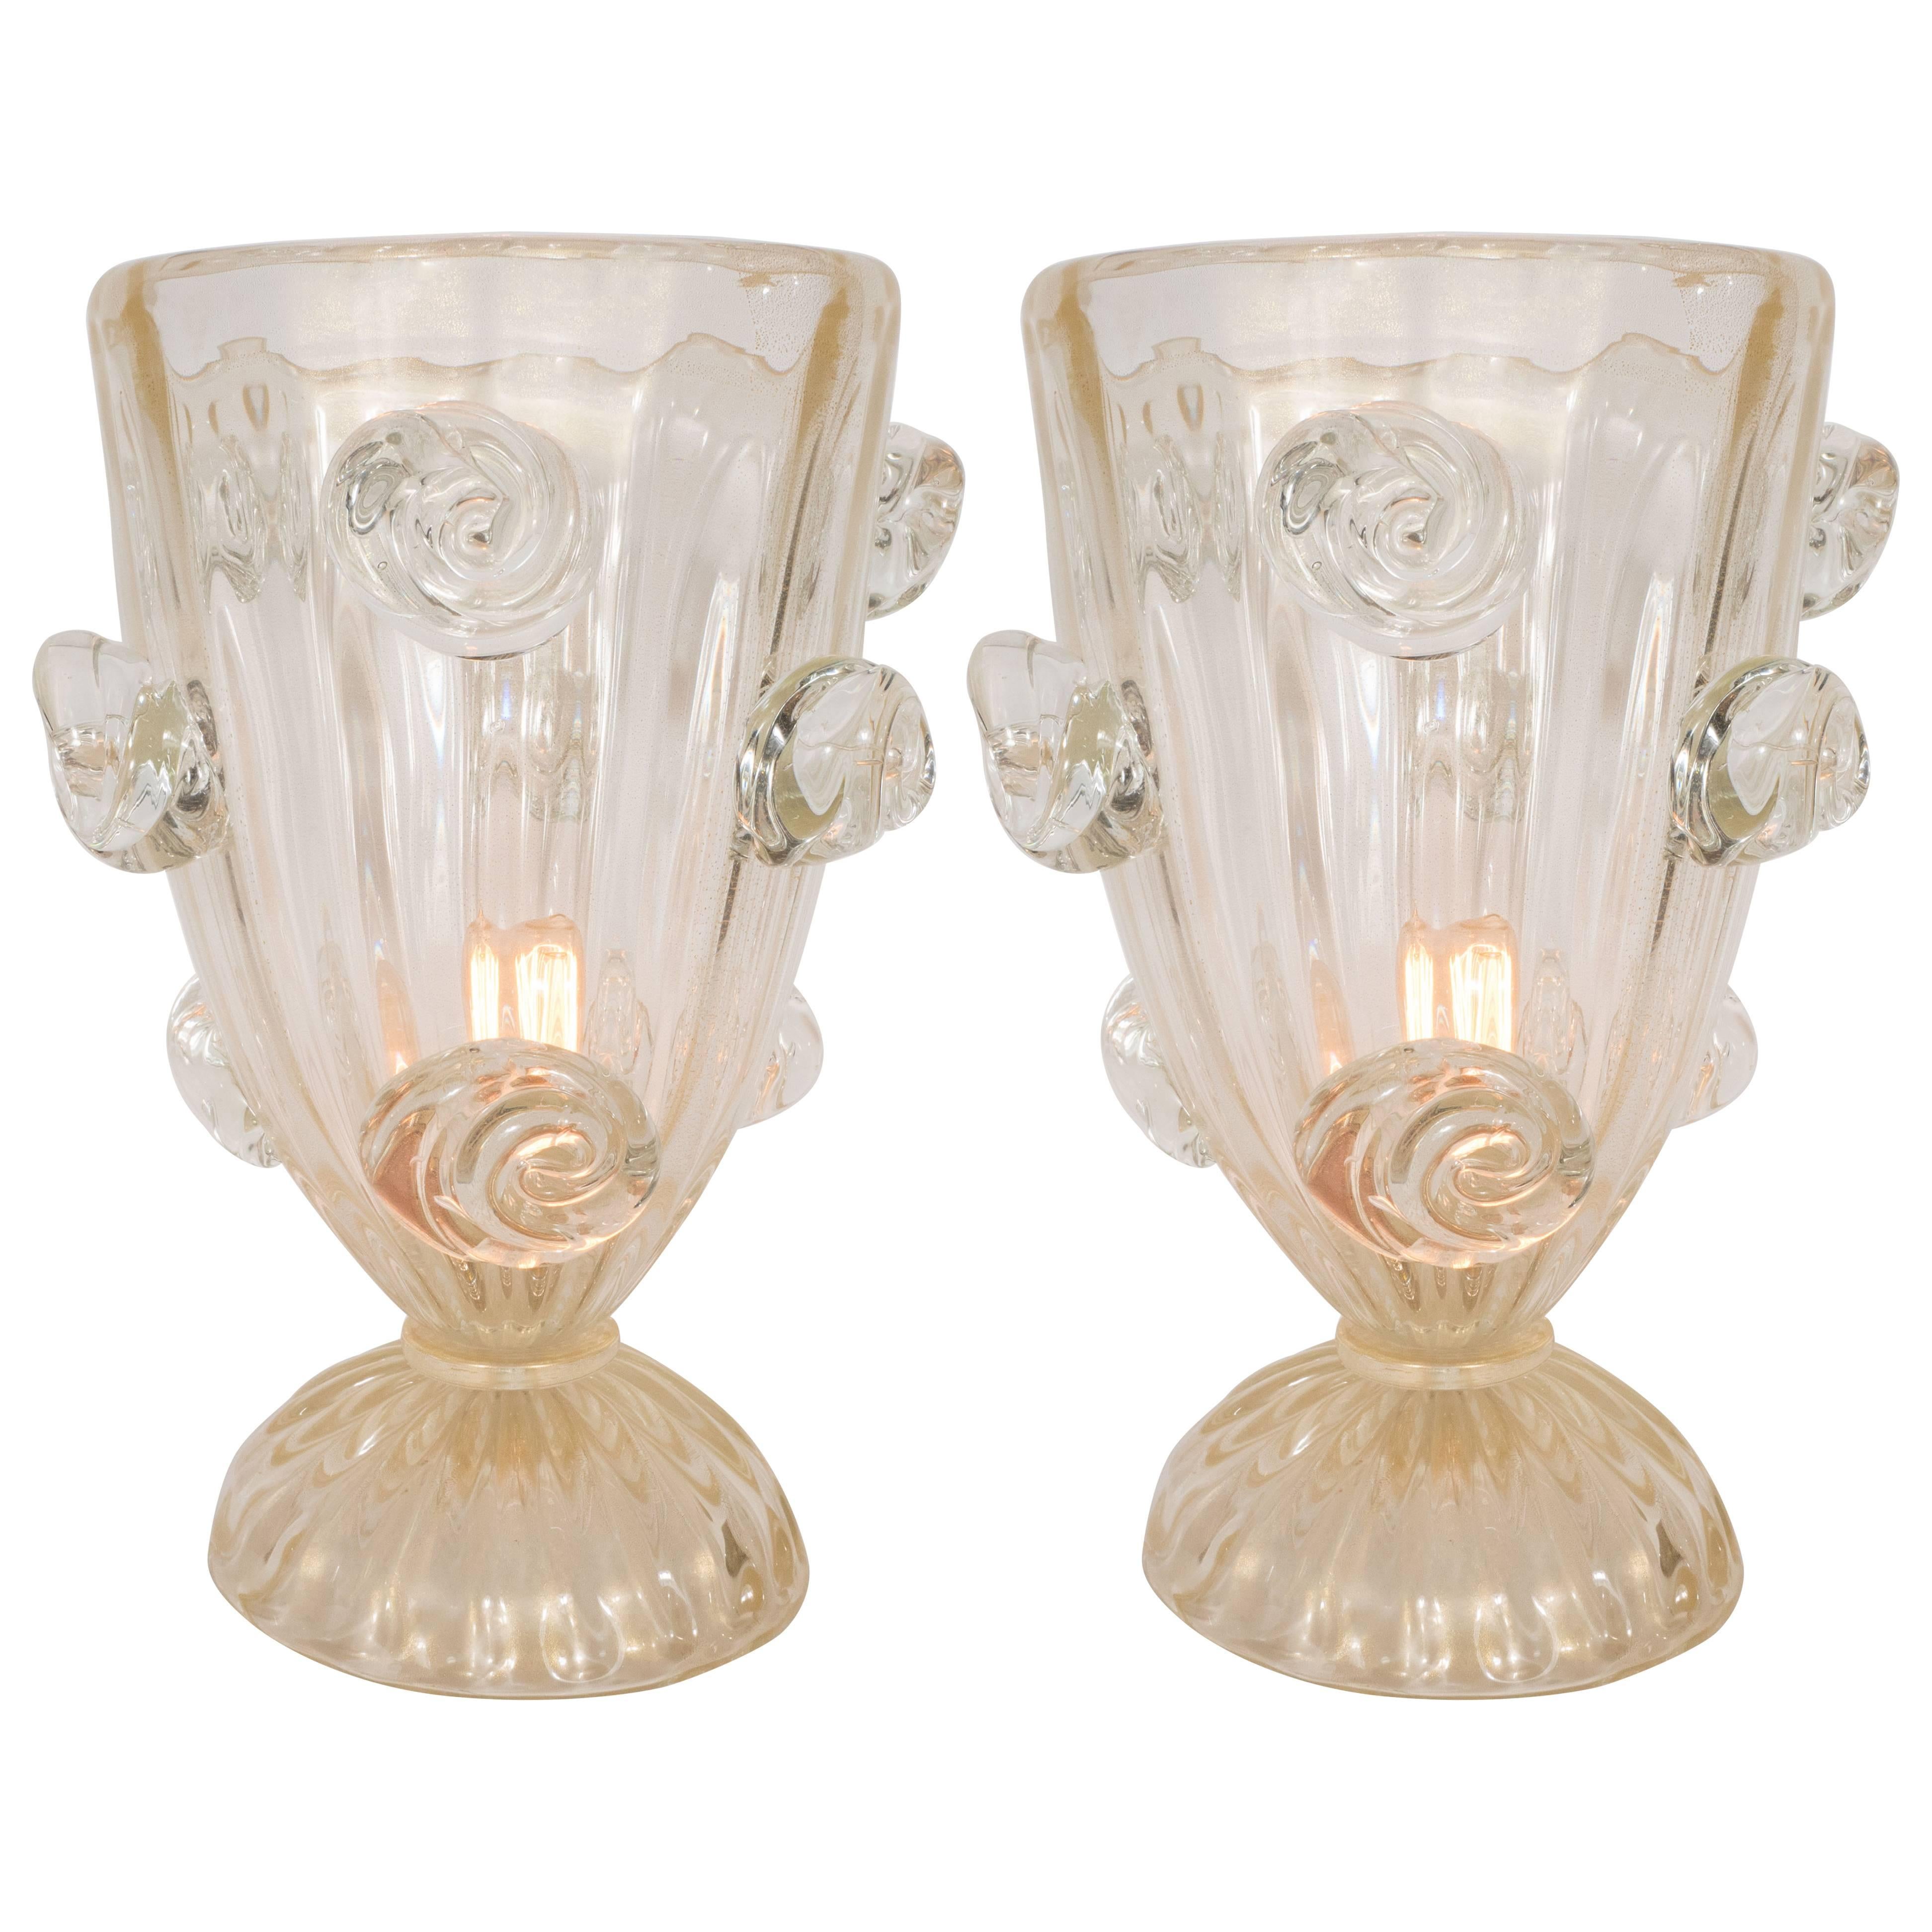 Exquisite pair of Art Deco Murano Venetian handblown glass up-lights featuring 24-karat yellow-gold flecks throughout in a fluted urn shape design and adorned with stylized handblown roses. Newly rewired.

Italian, circa 1945
Dimensions: